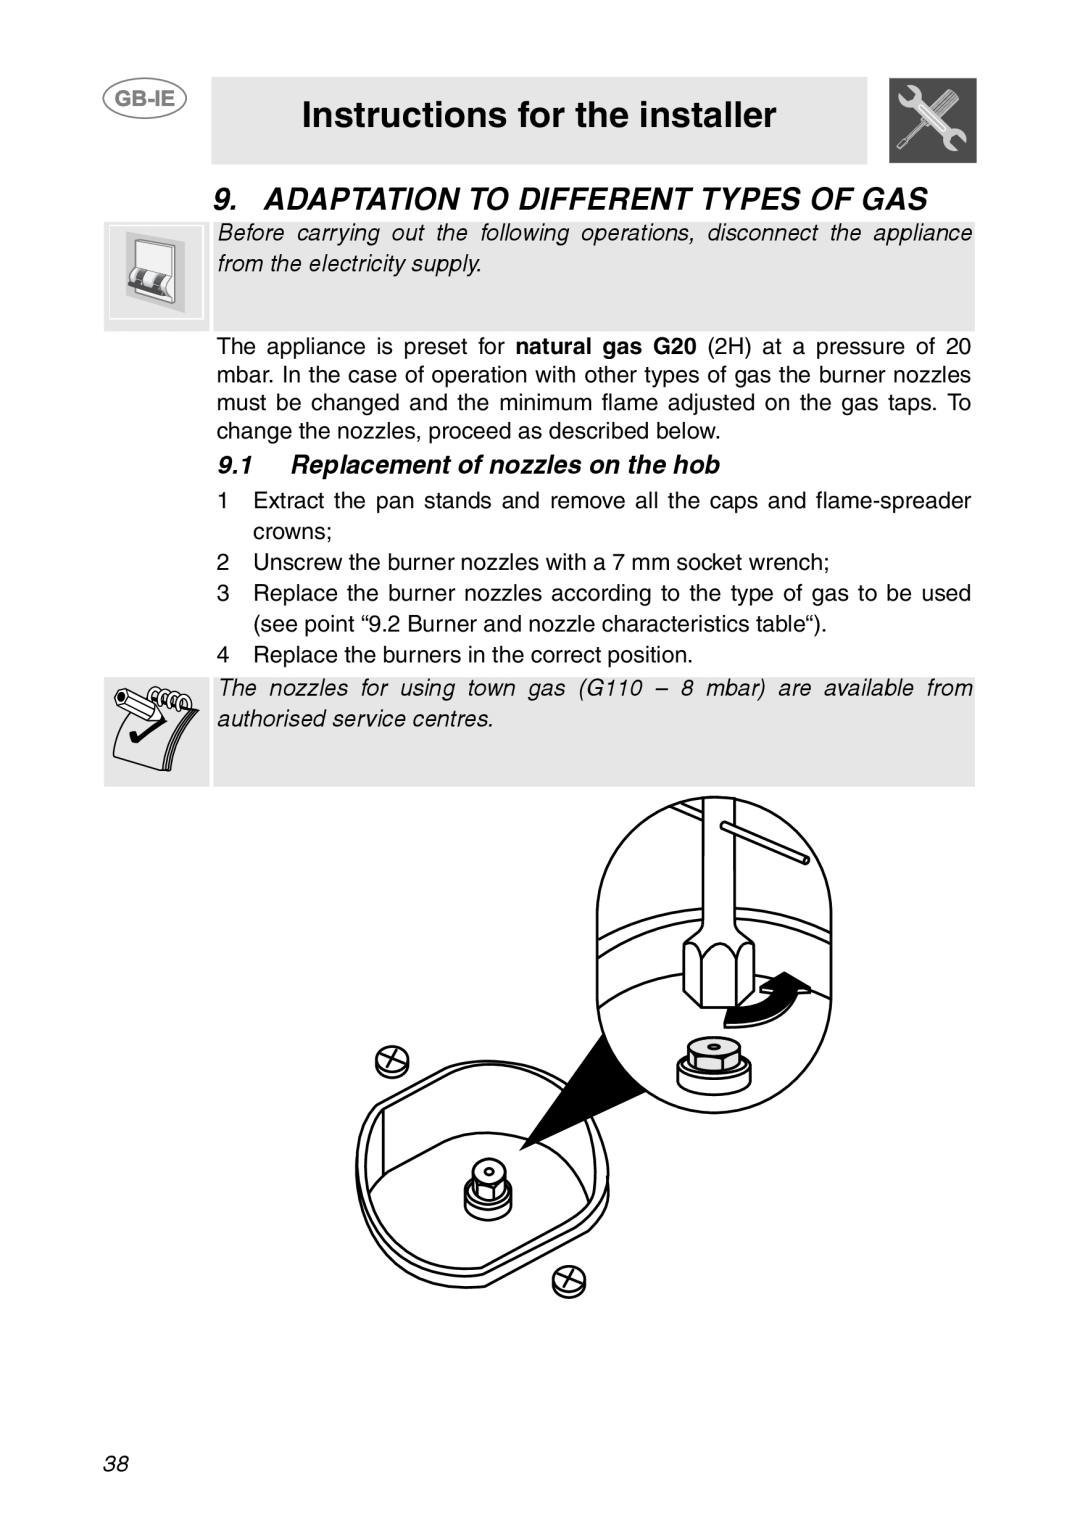 Smeg HB96CSS-3 Adaptation To Different Types Of Gas, Instructions for the installer, 9.1Replacement of nozzles on the hob 